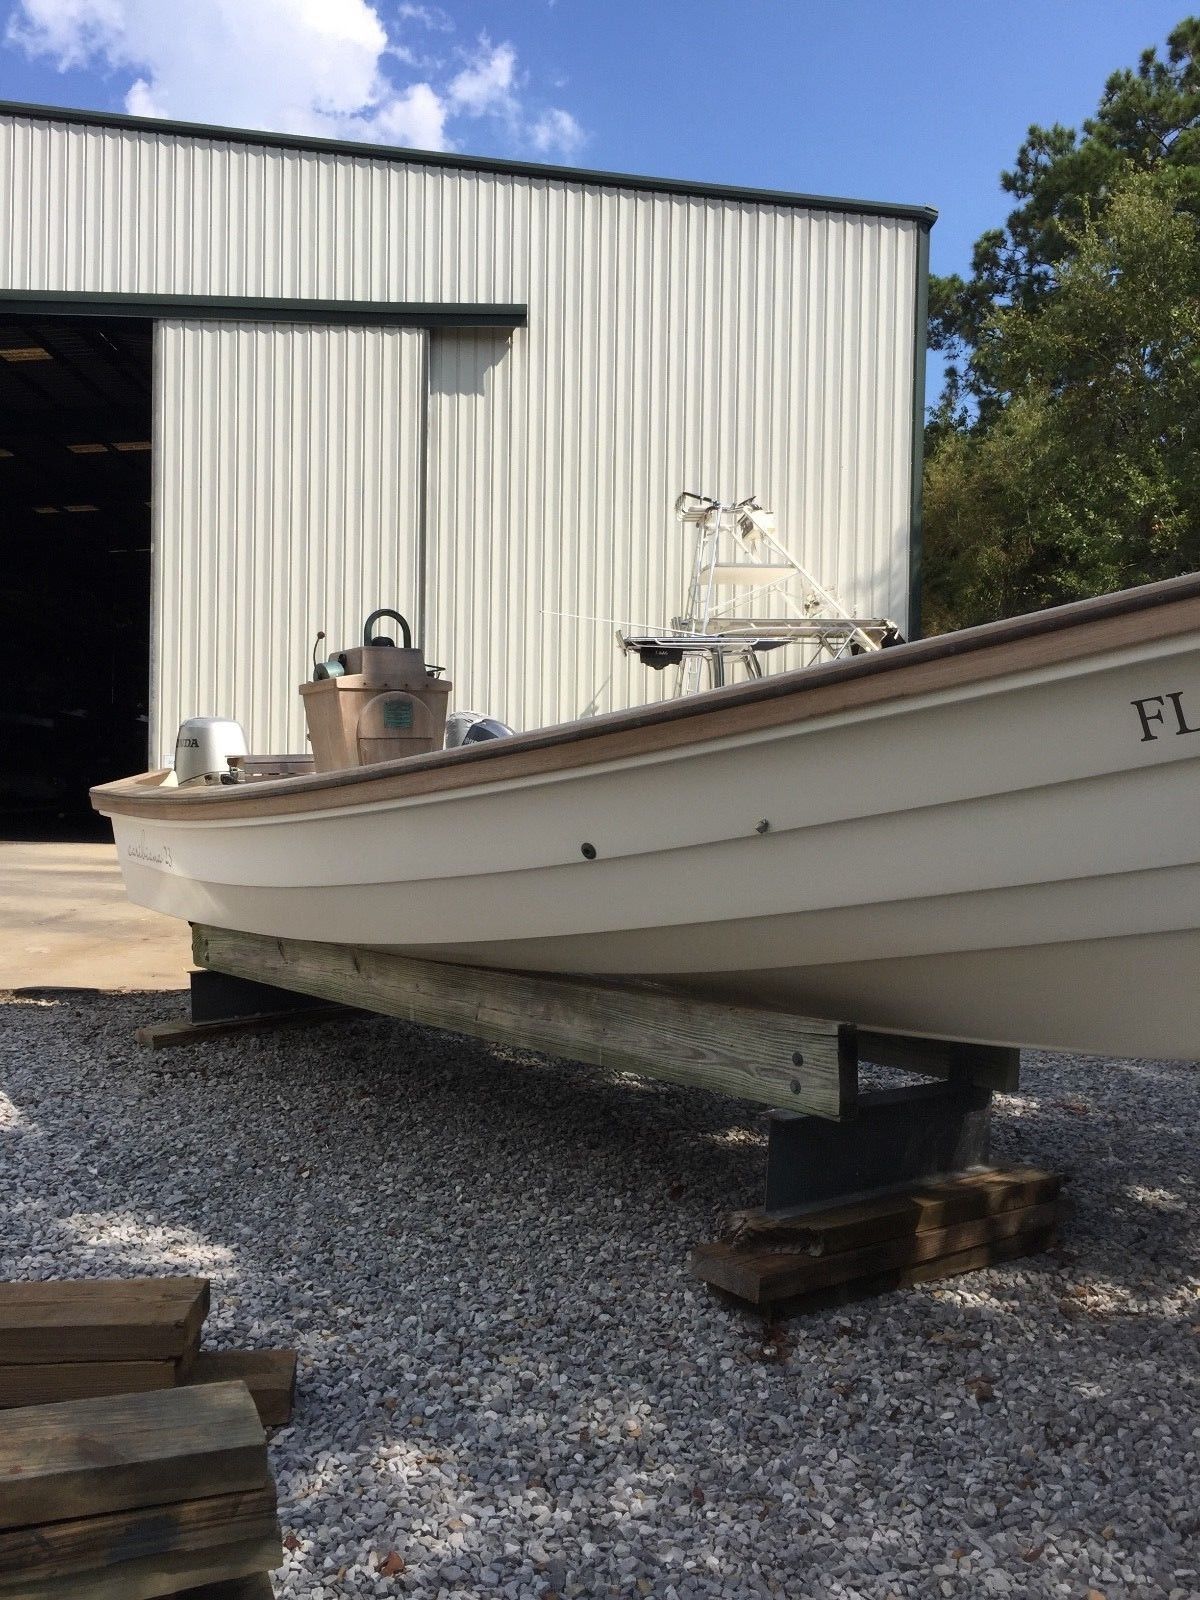 Caribiana Sea Skiff 2001 for sale for $22,000 - Boats-from 